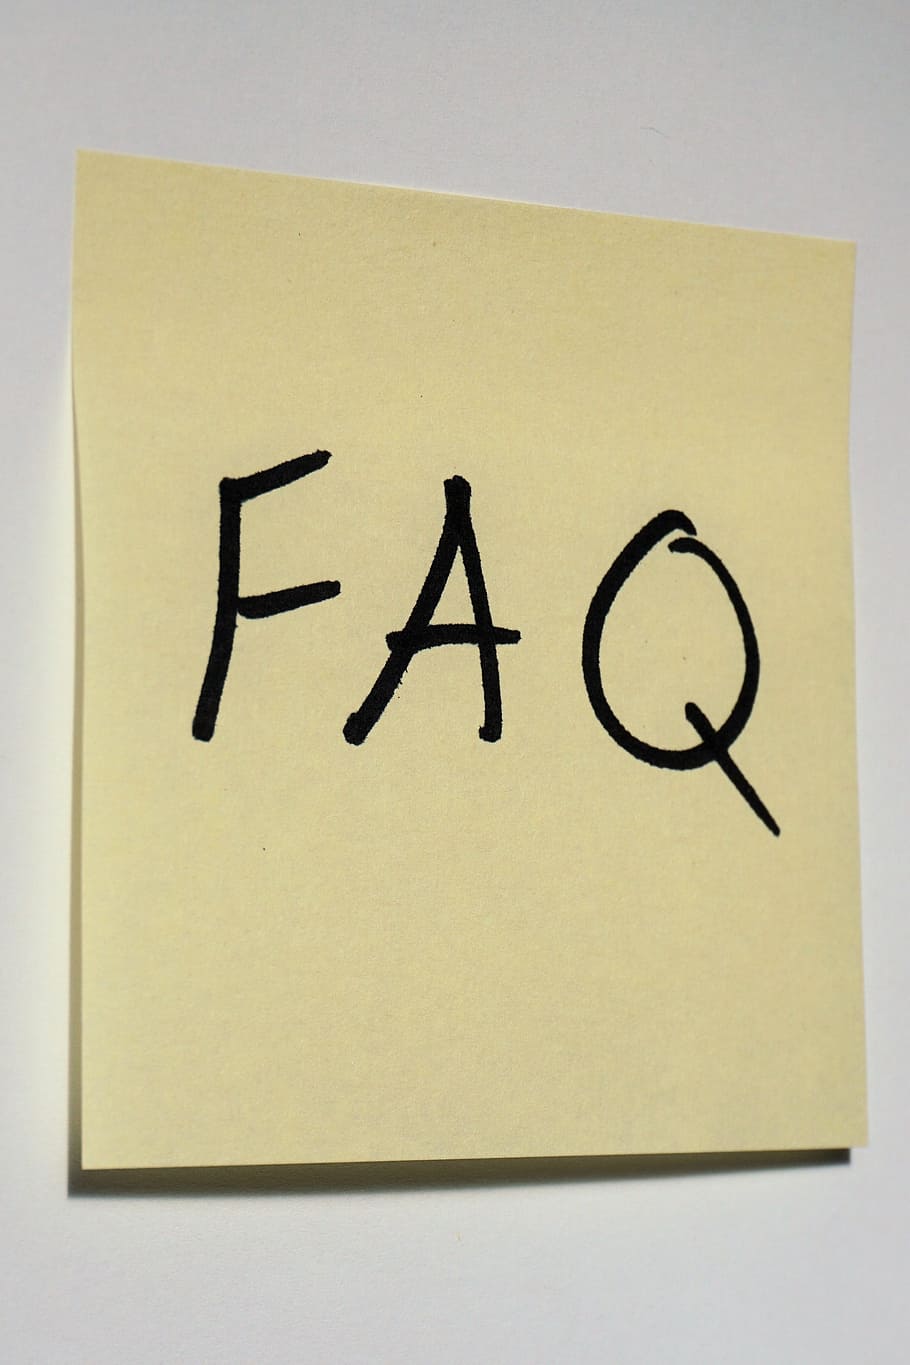 beige, printer paper, faq text, Post It, List, Note, Adhesive, memo, adhesive note, office